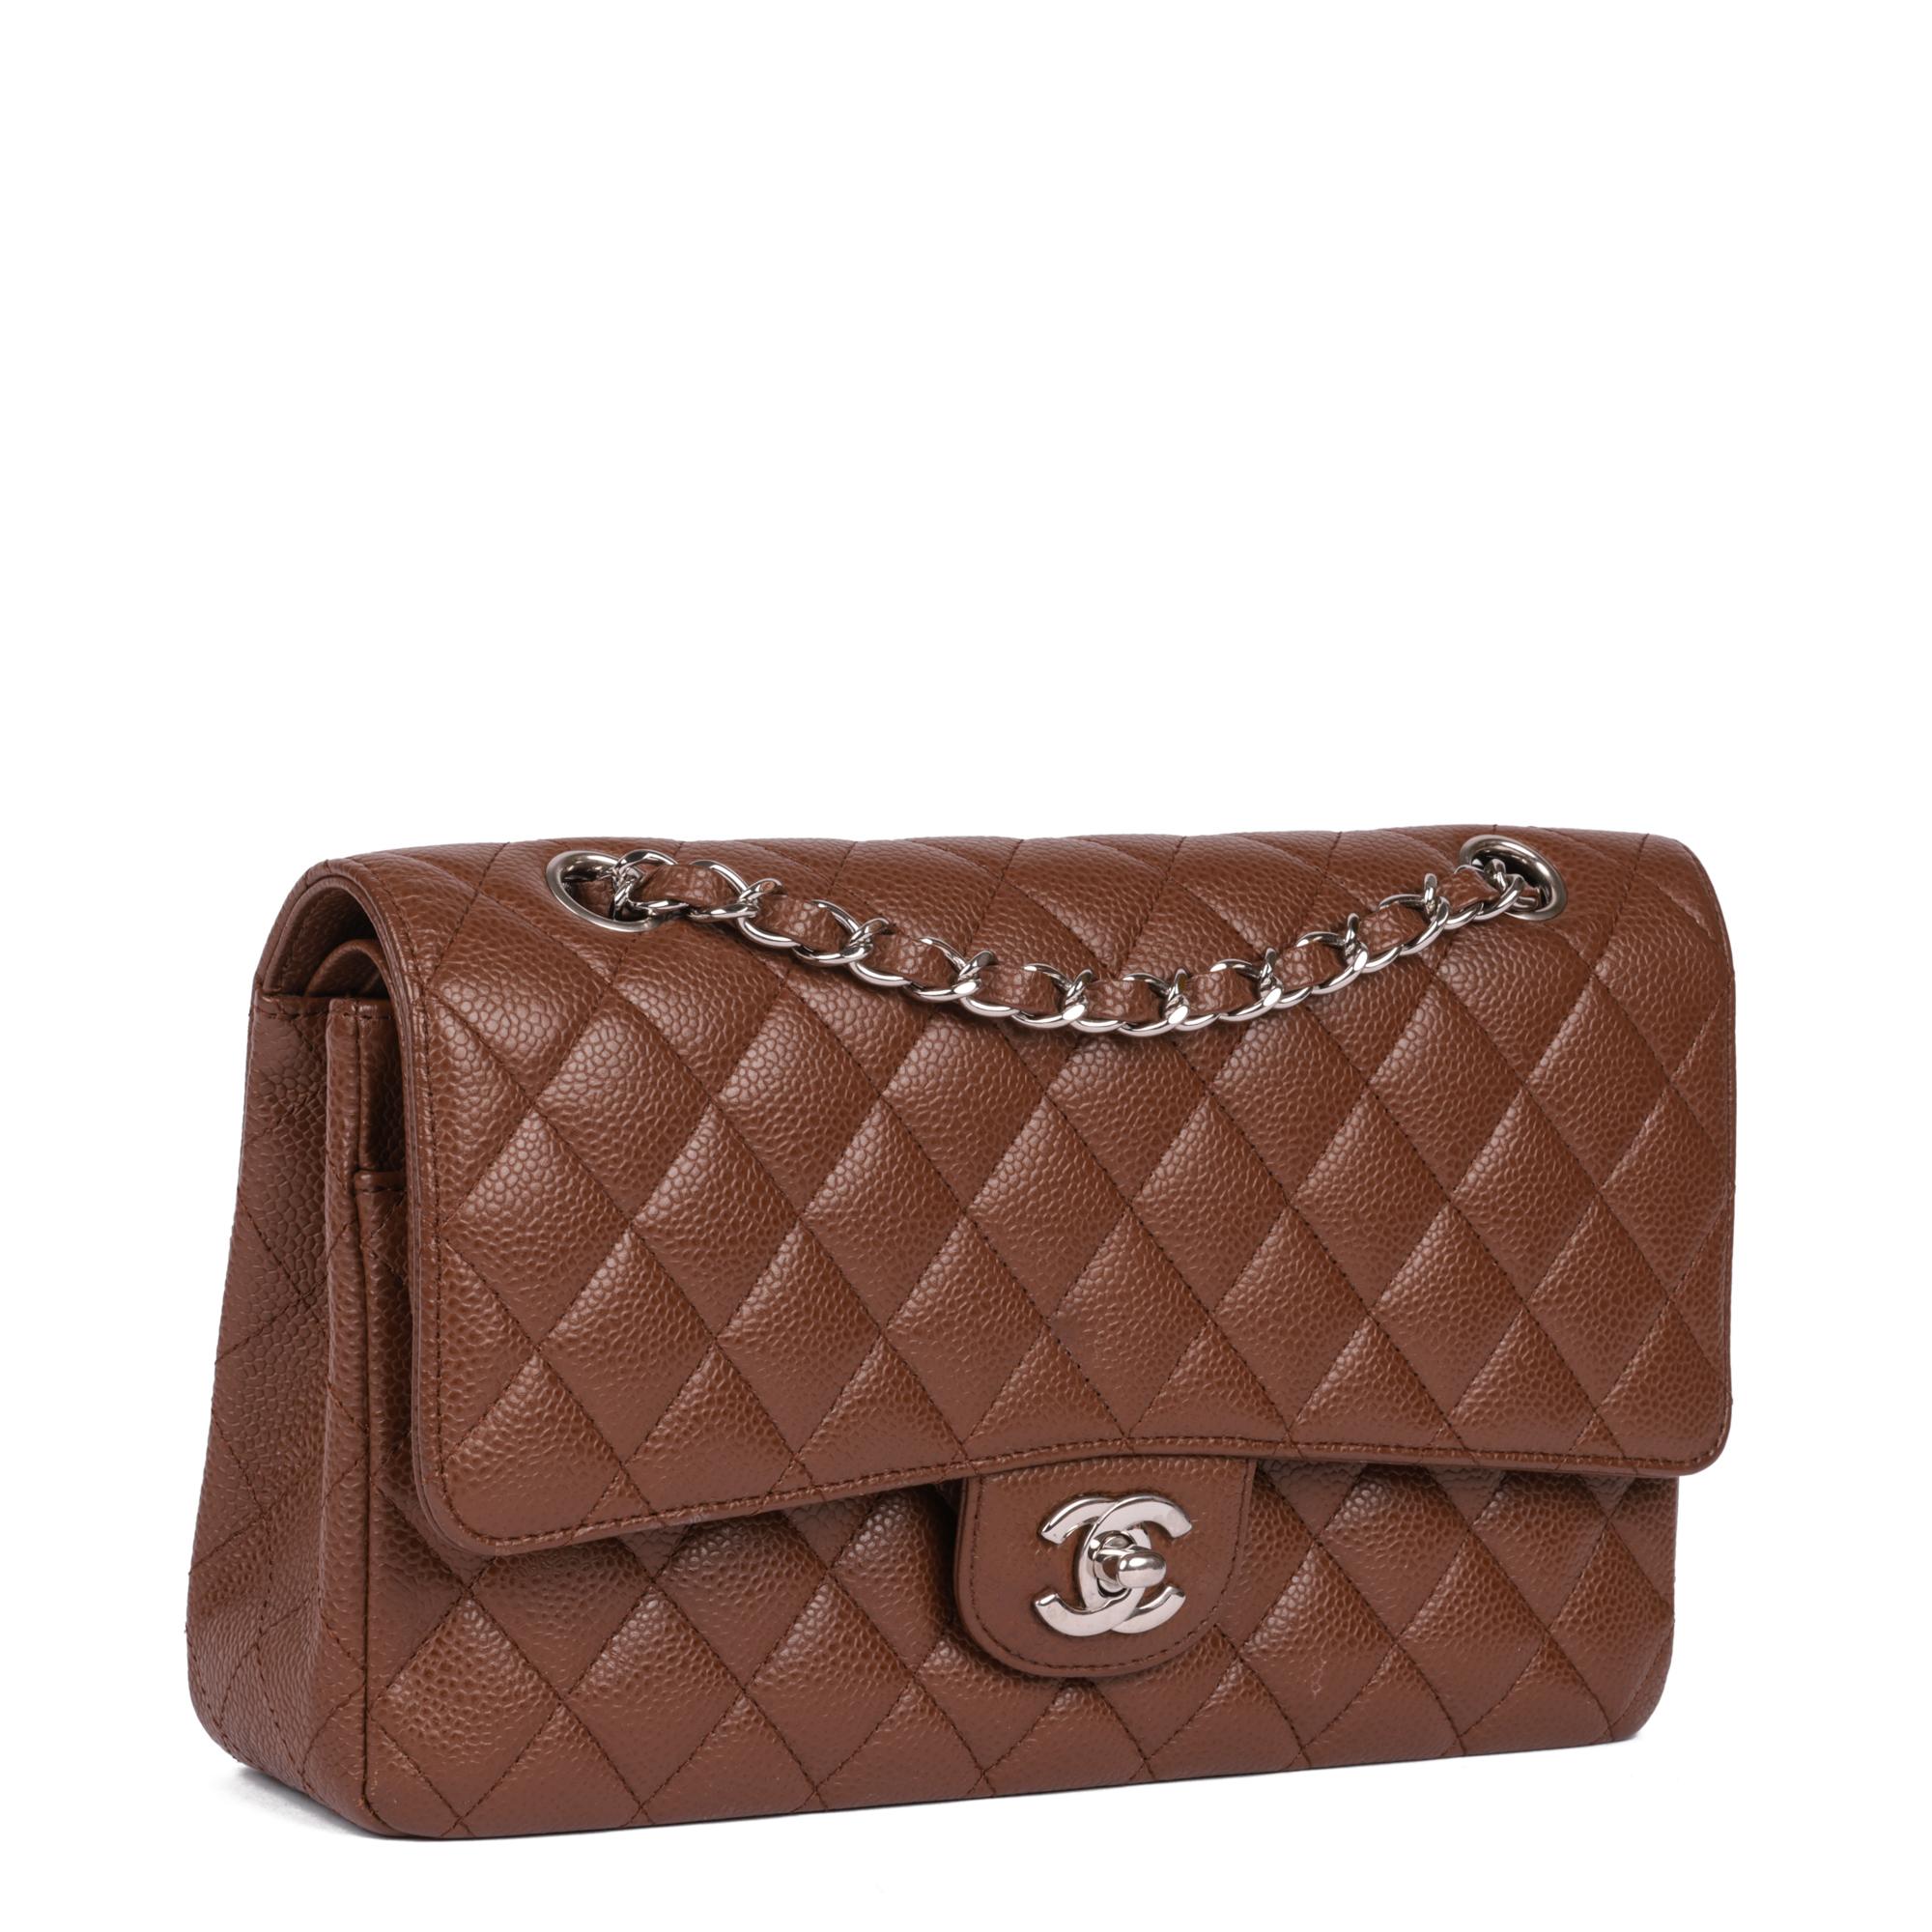 CHANEL
Deep Caramel Quilted Caviar Leather Medium Classic Double Flap Bag

Serial Number: 10996752
Age (Circa): 2005
Accompanied By: Chanel Dust Bag
Authenticity Details: Serial Sticker (Made in France)
Gender: Ladies
Type: Shoulder

Colour: Deep